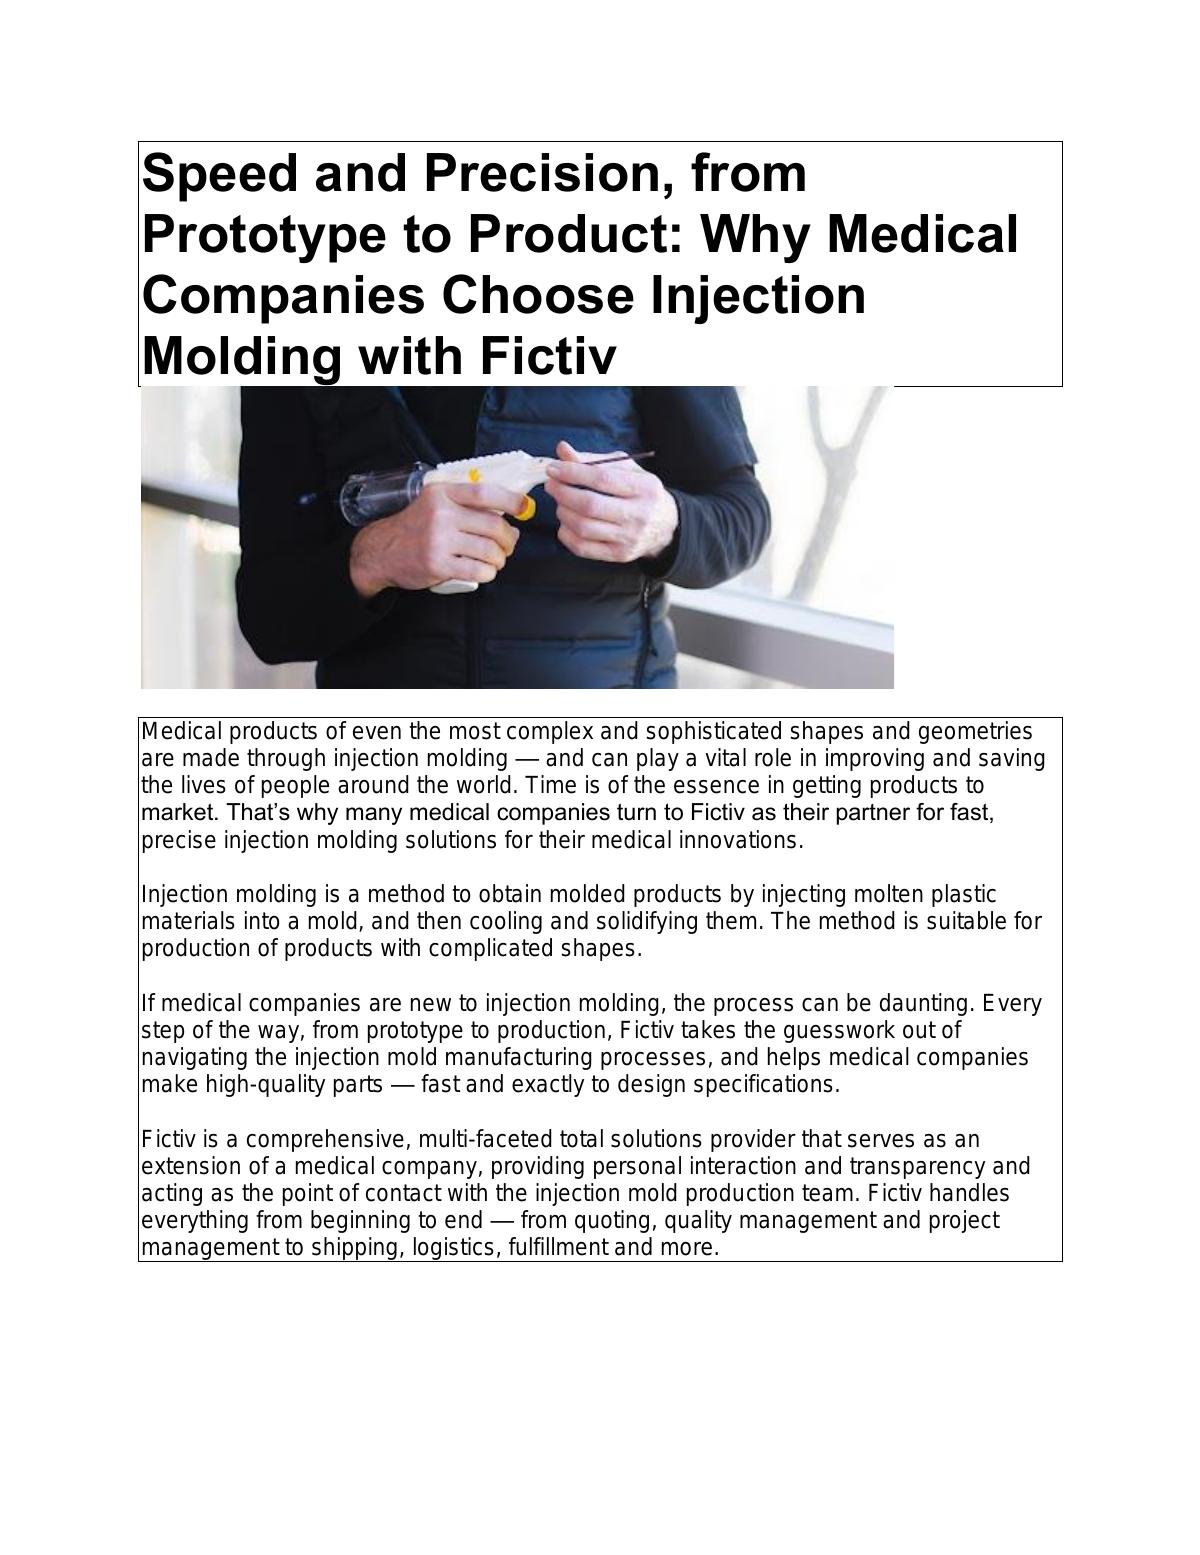 Speed and Precision, from Prototype to Product: Why Medical Companies Choose Injection Molding with Fictiv